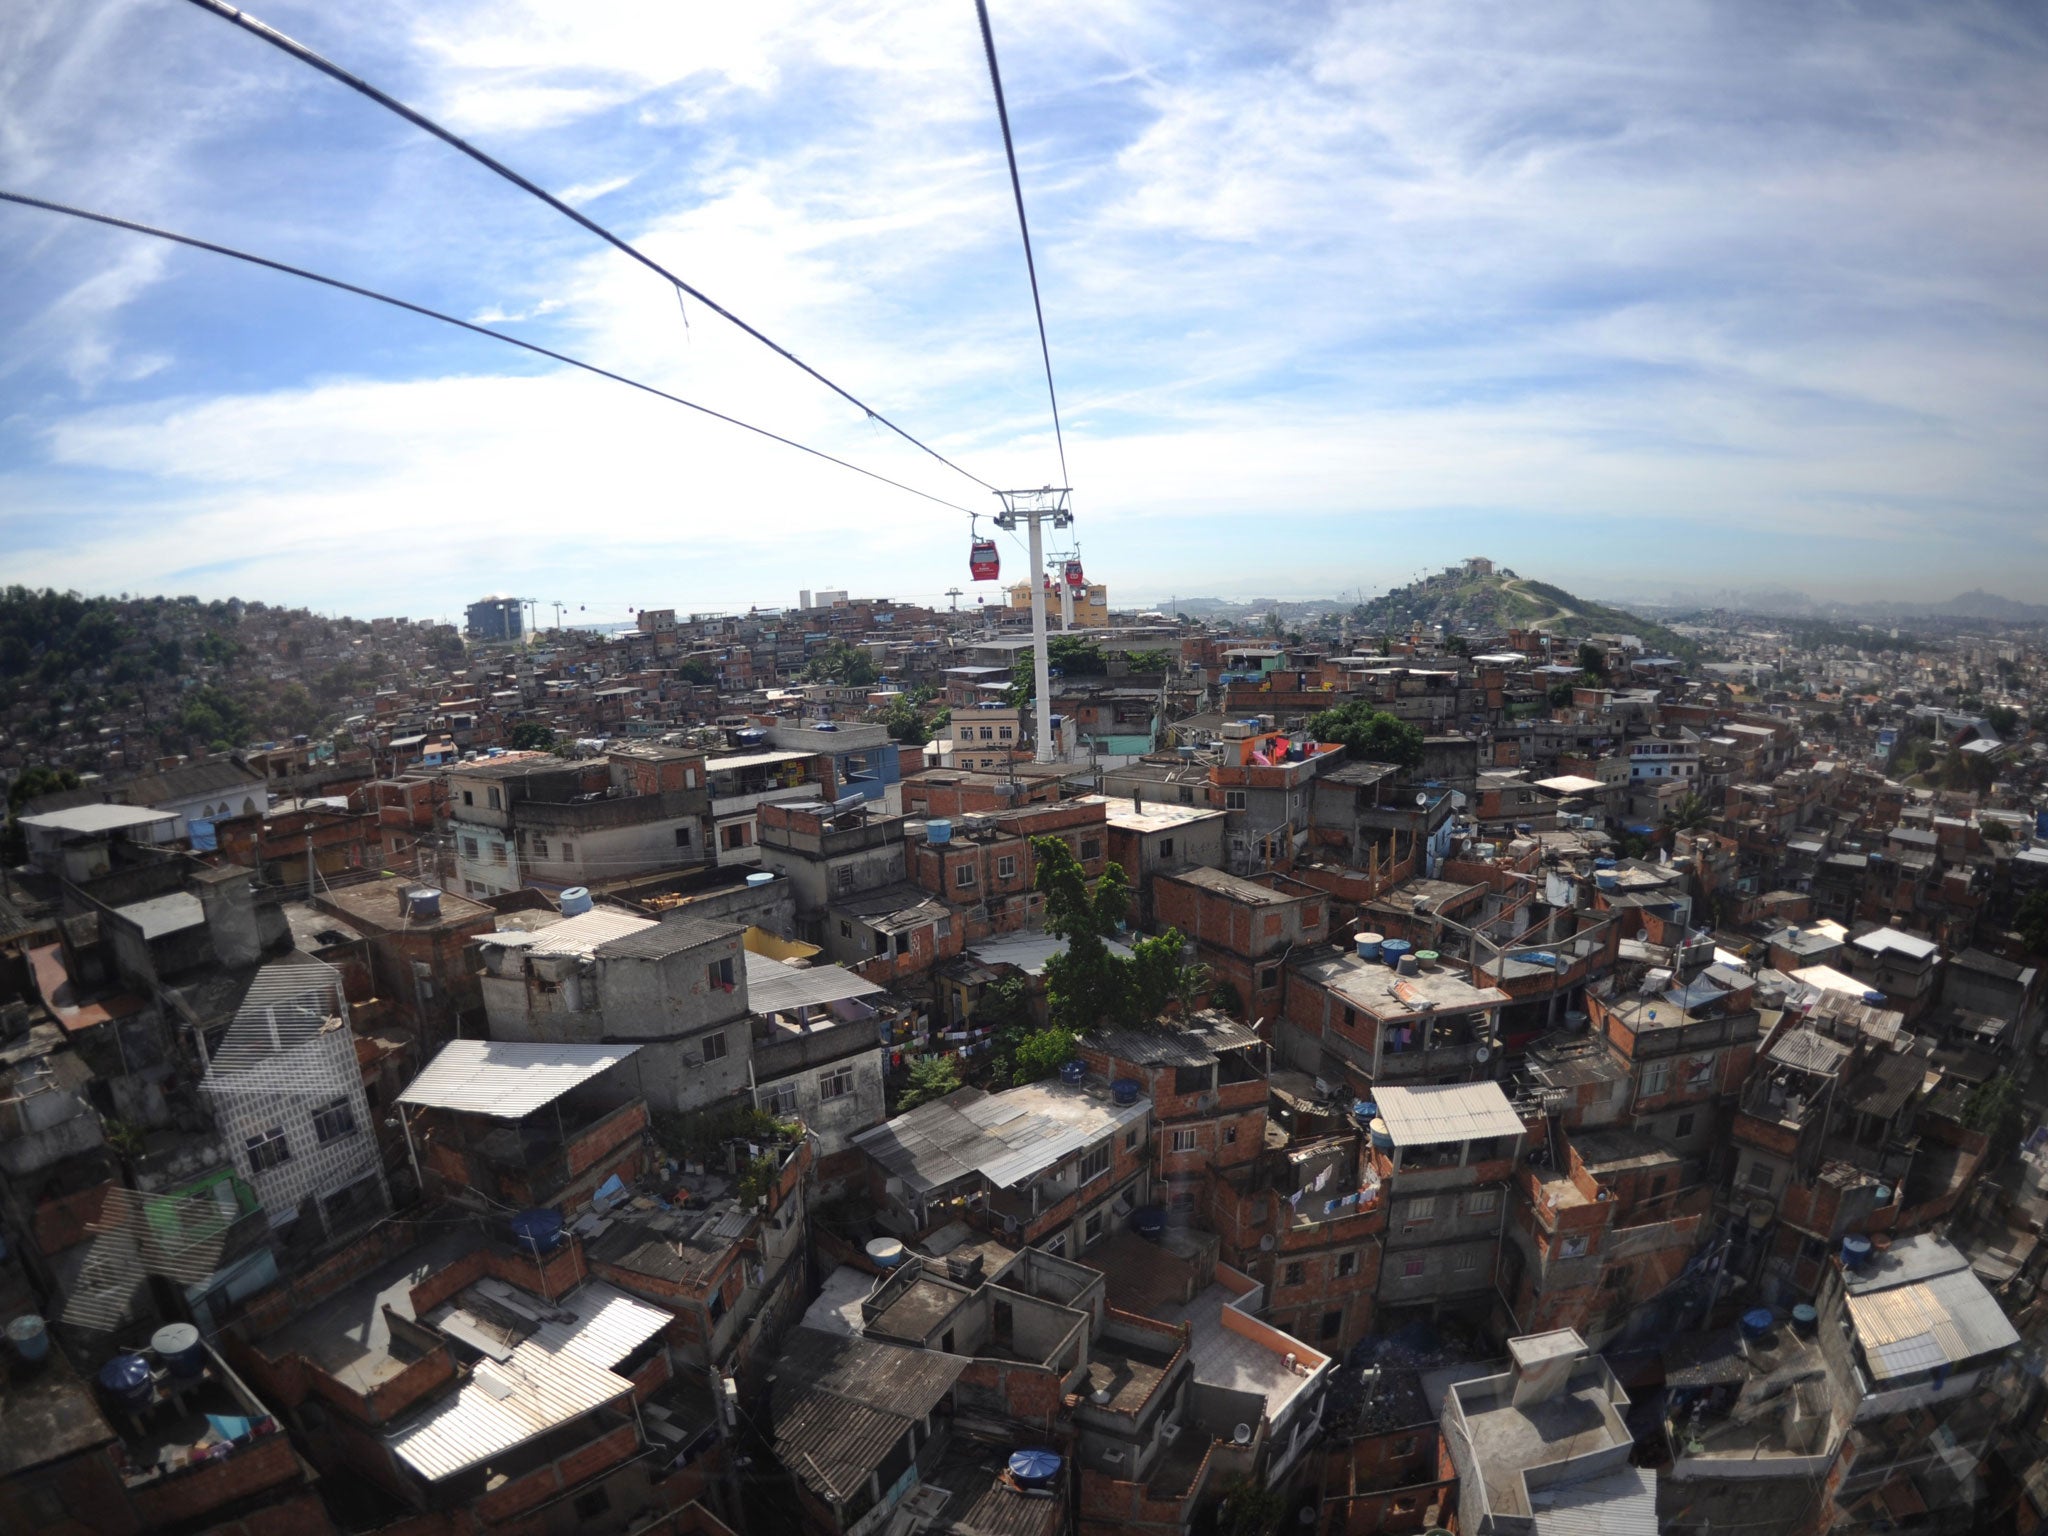 The cable car in the Alemao favela has become a massive tourist attraction